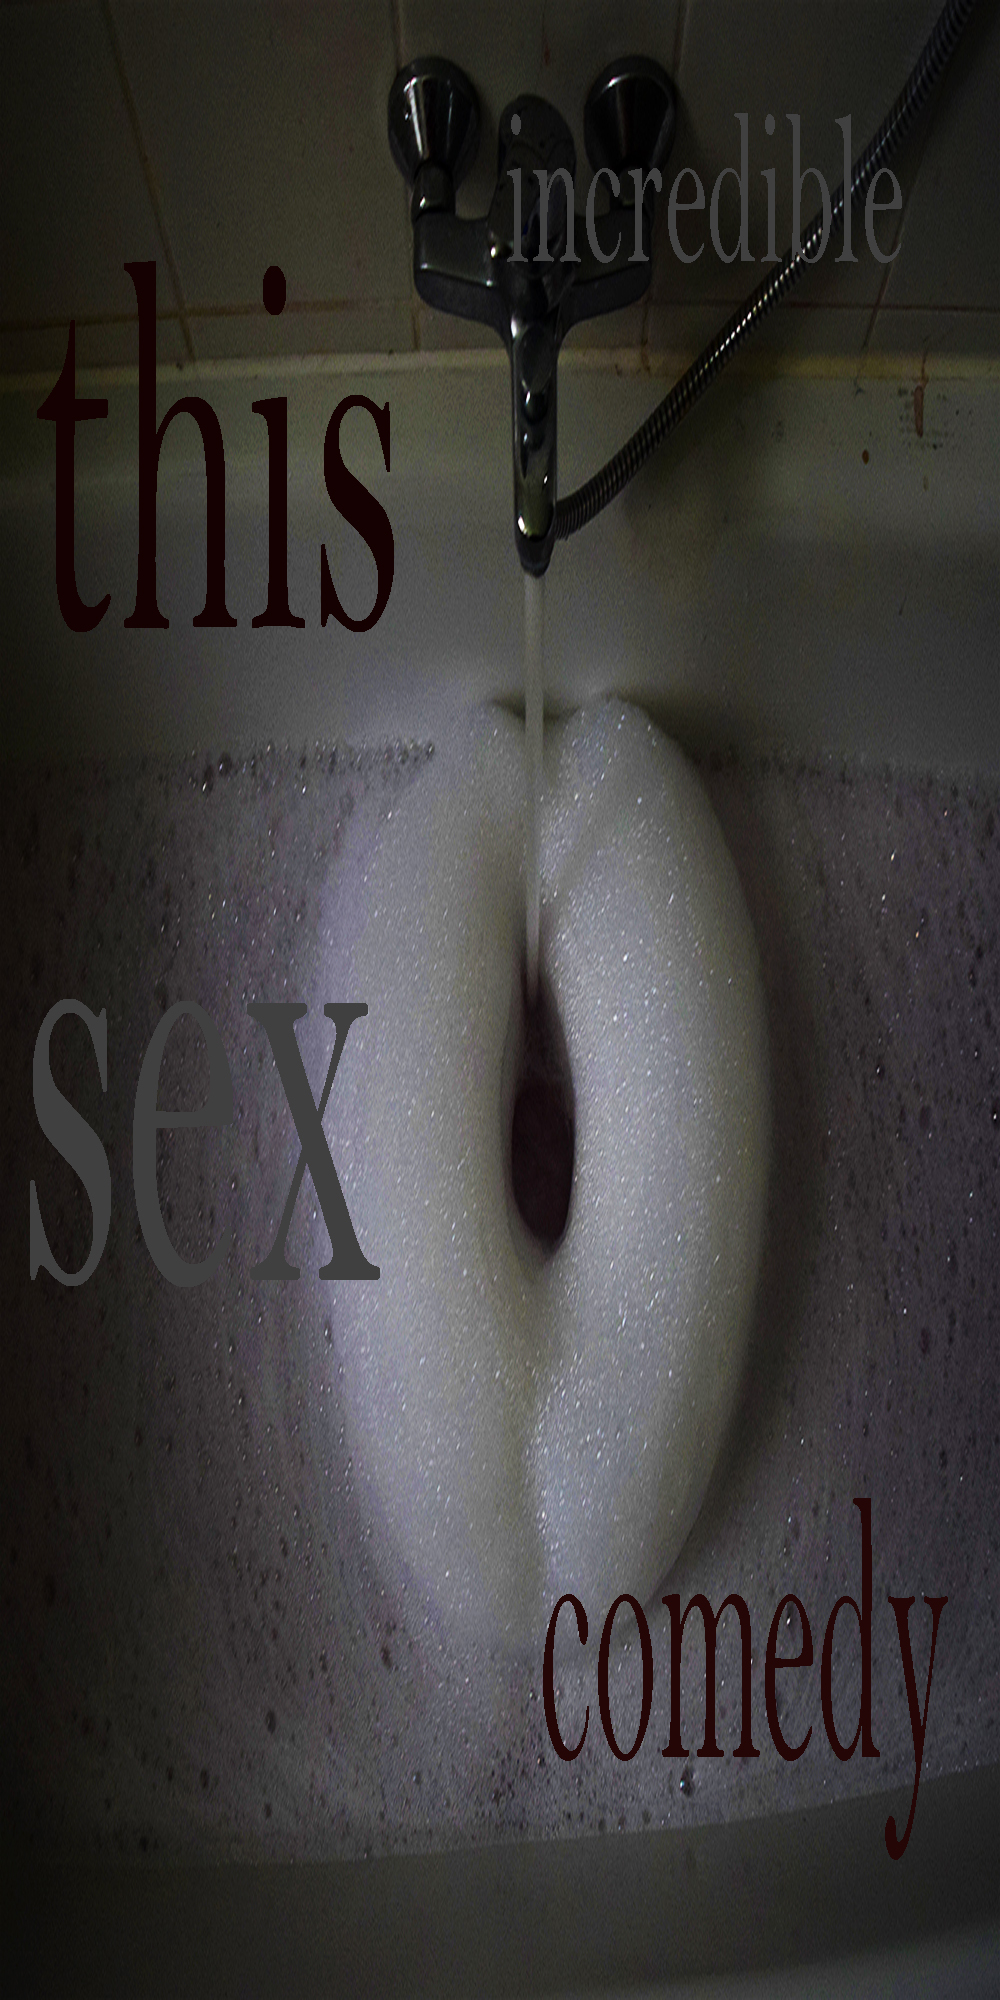 THIS INCREDIBLE SEX COMEDY EXCERPTS (chapters 28, 29 and picture